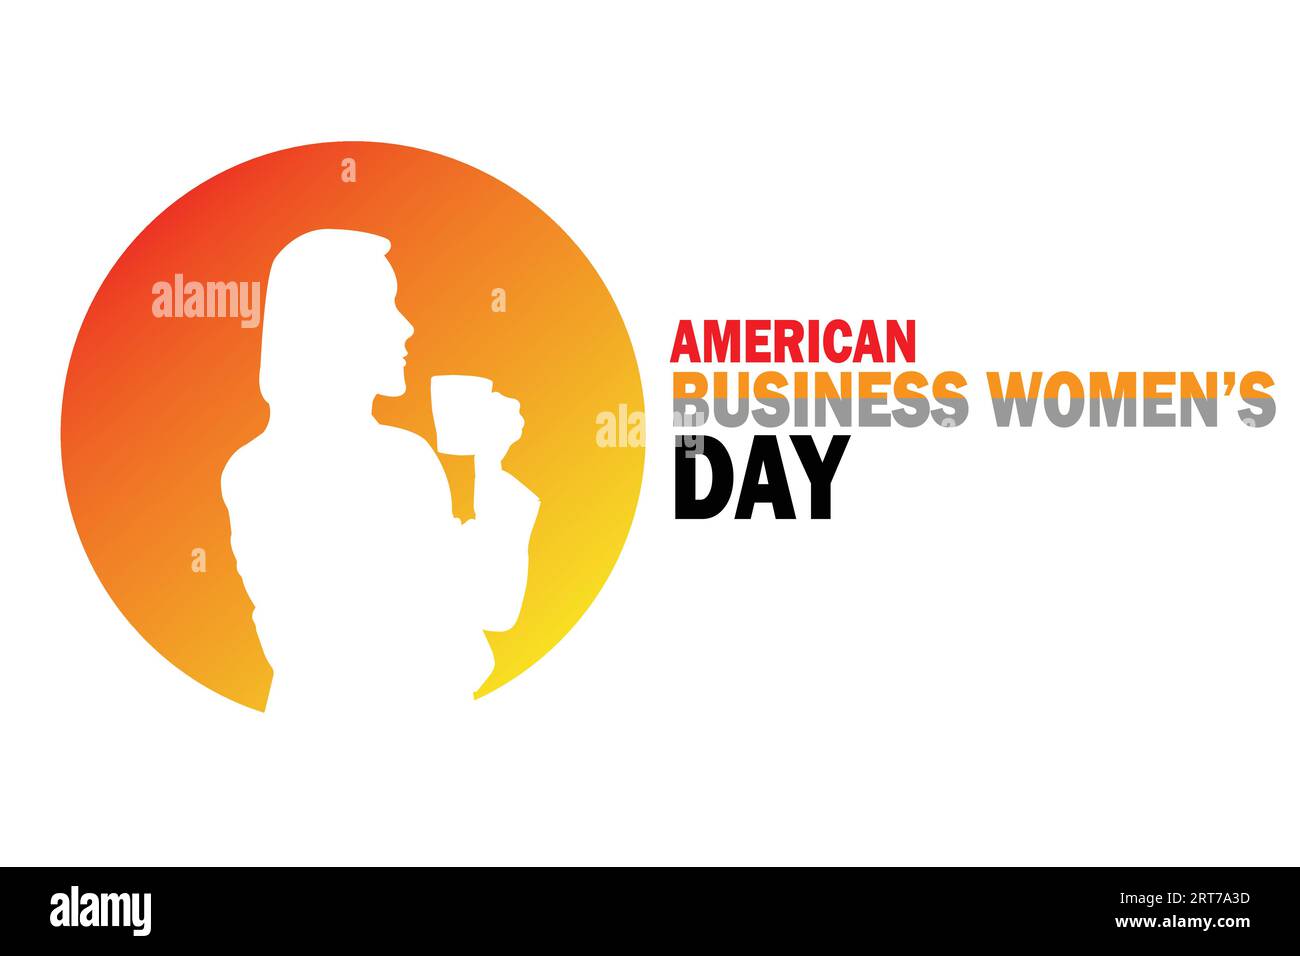 American Business Women's Day Vector illustration. Holiday concept. Template for background, banner, card, poster with text inscription. Stock Vector